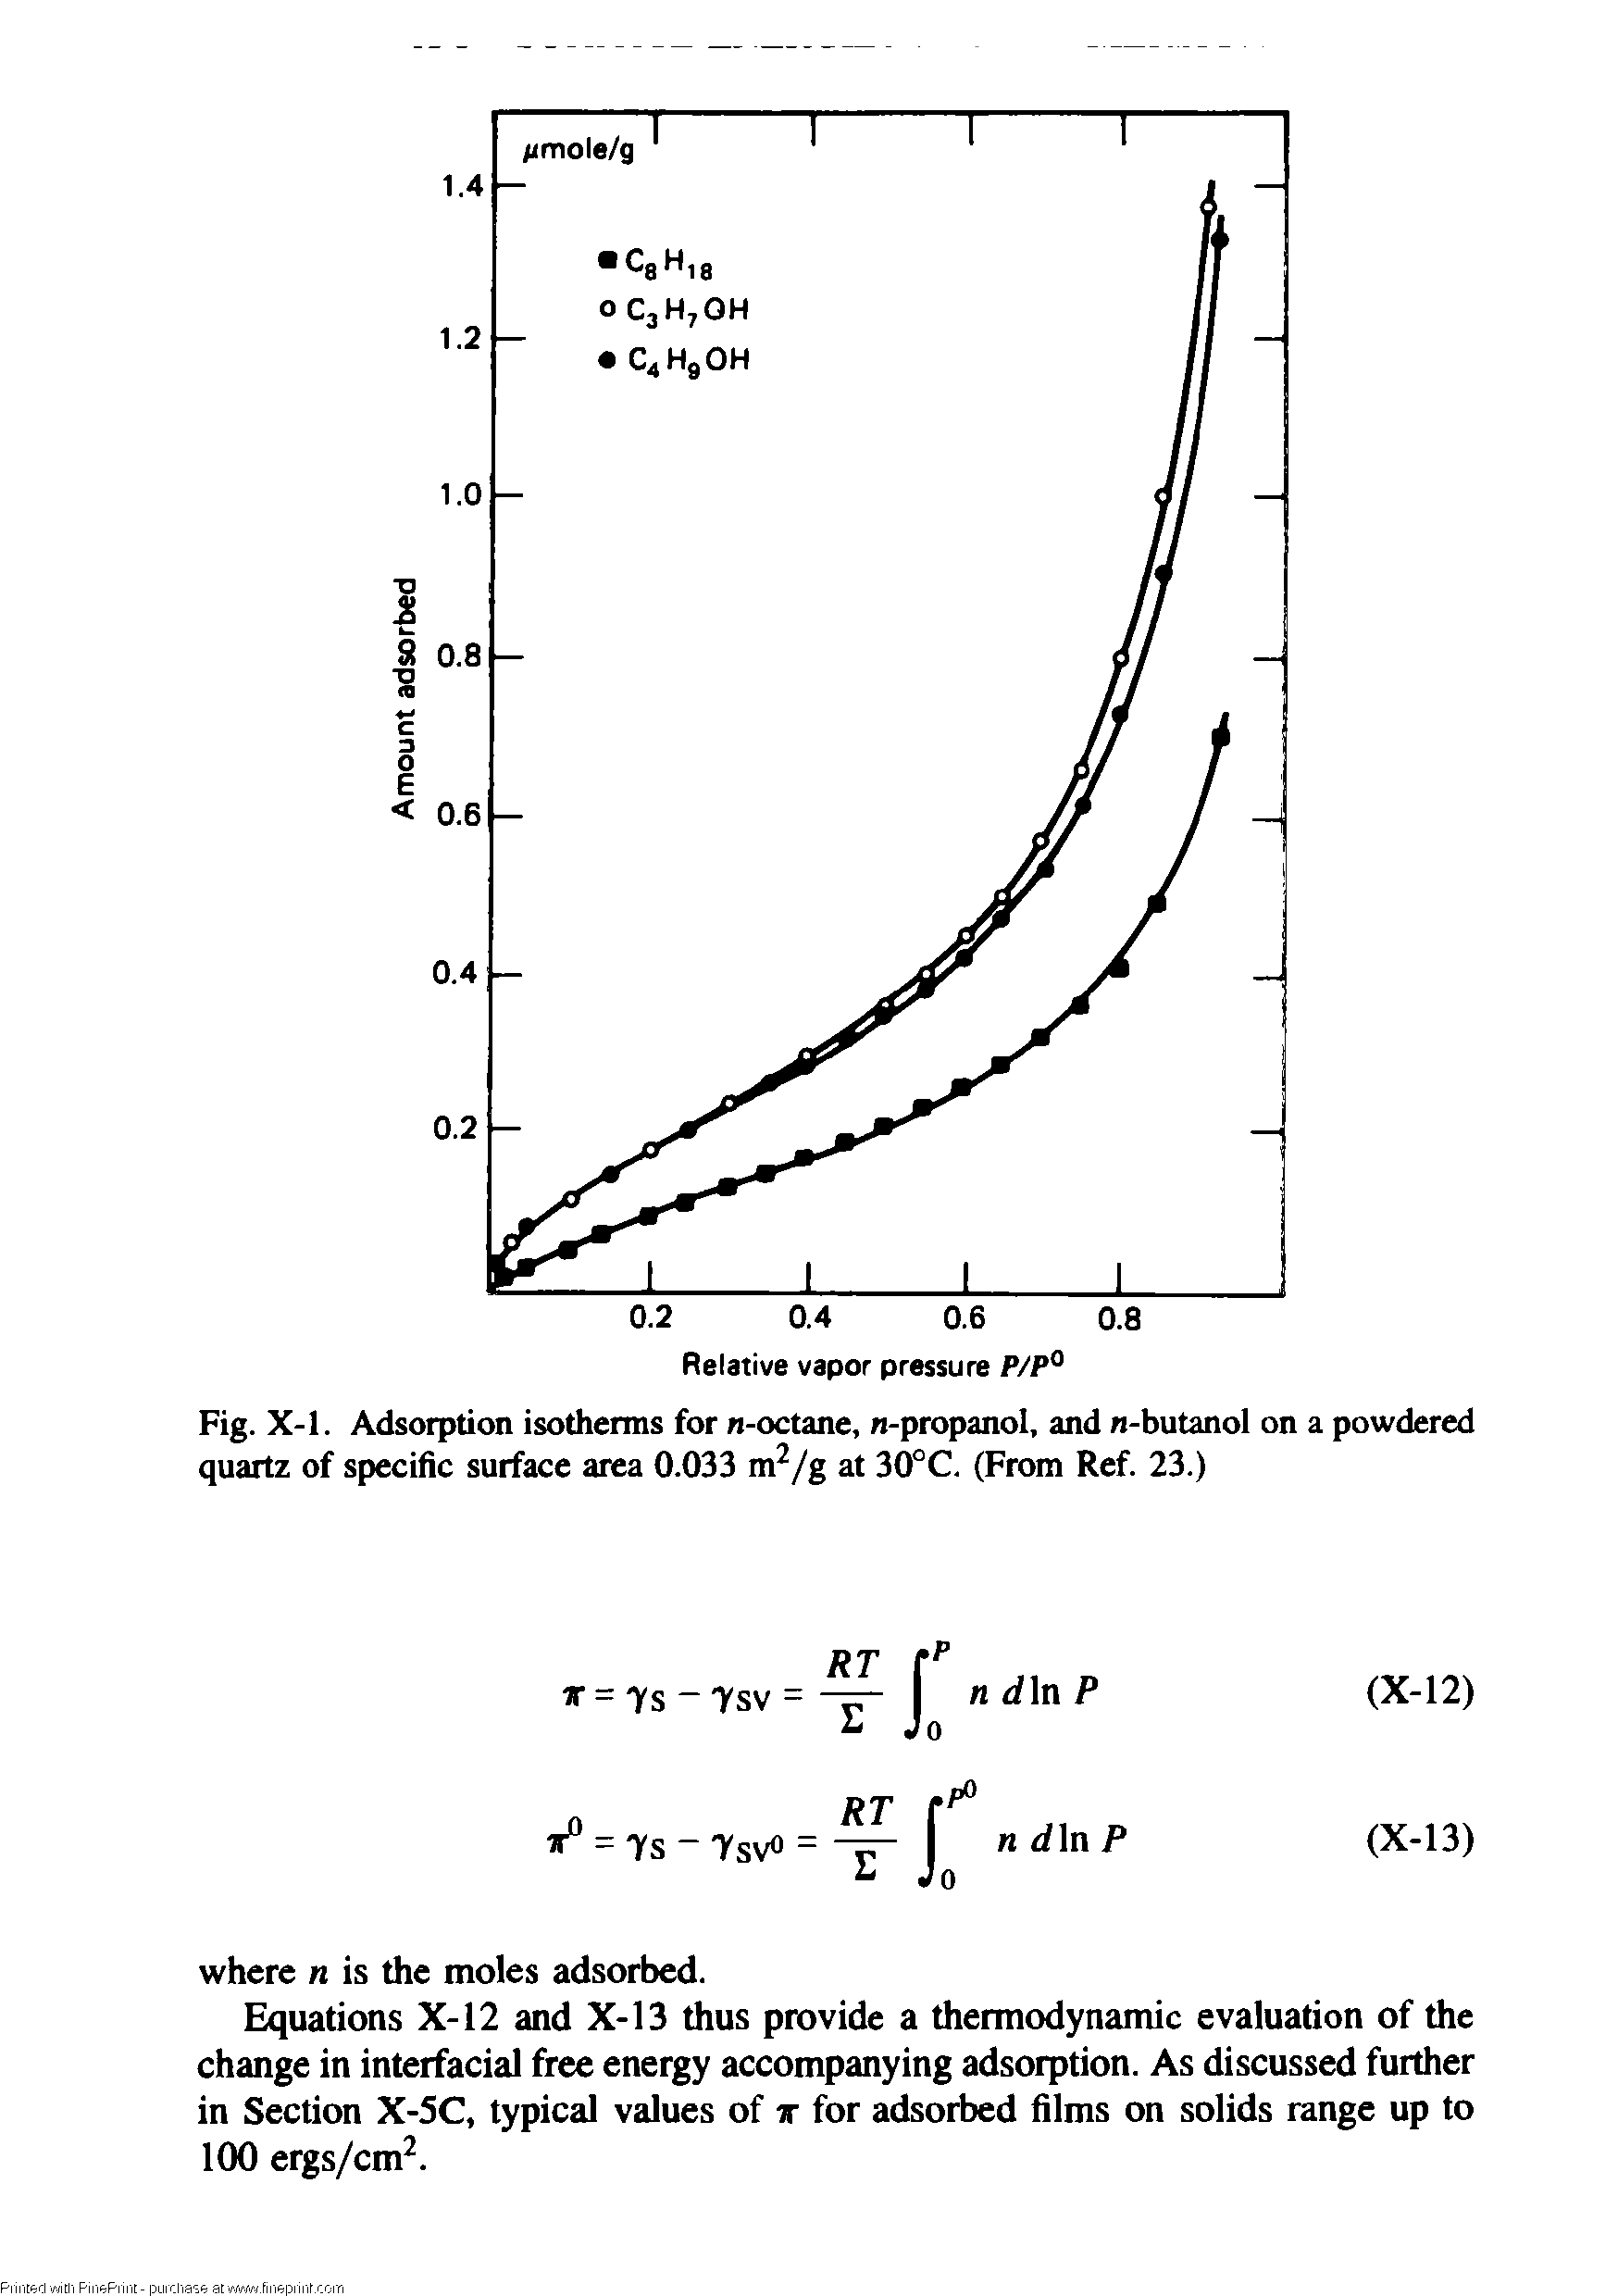 Fig. X-1. Adsorption isotherms for n-octane, n-propanol, and n-butanol on a powdered quartz of specific surface area 0.033 m /g at 30°C. (From Ref. 23.)...